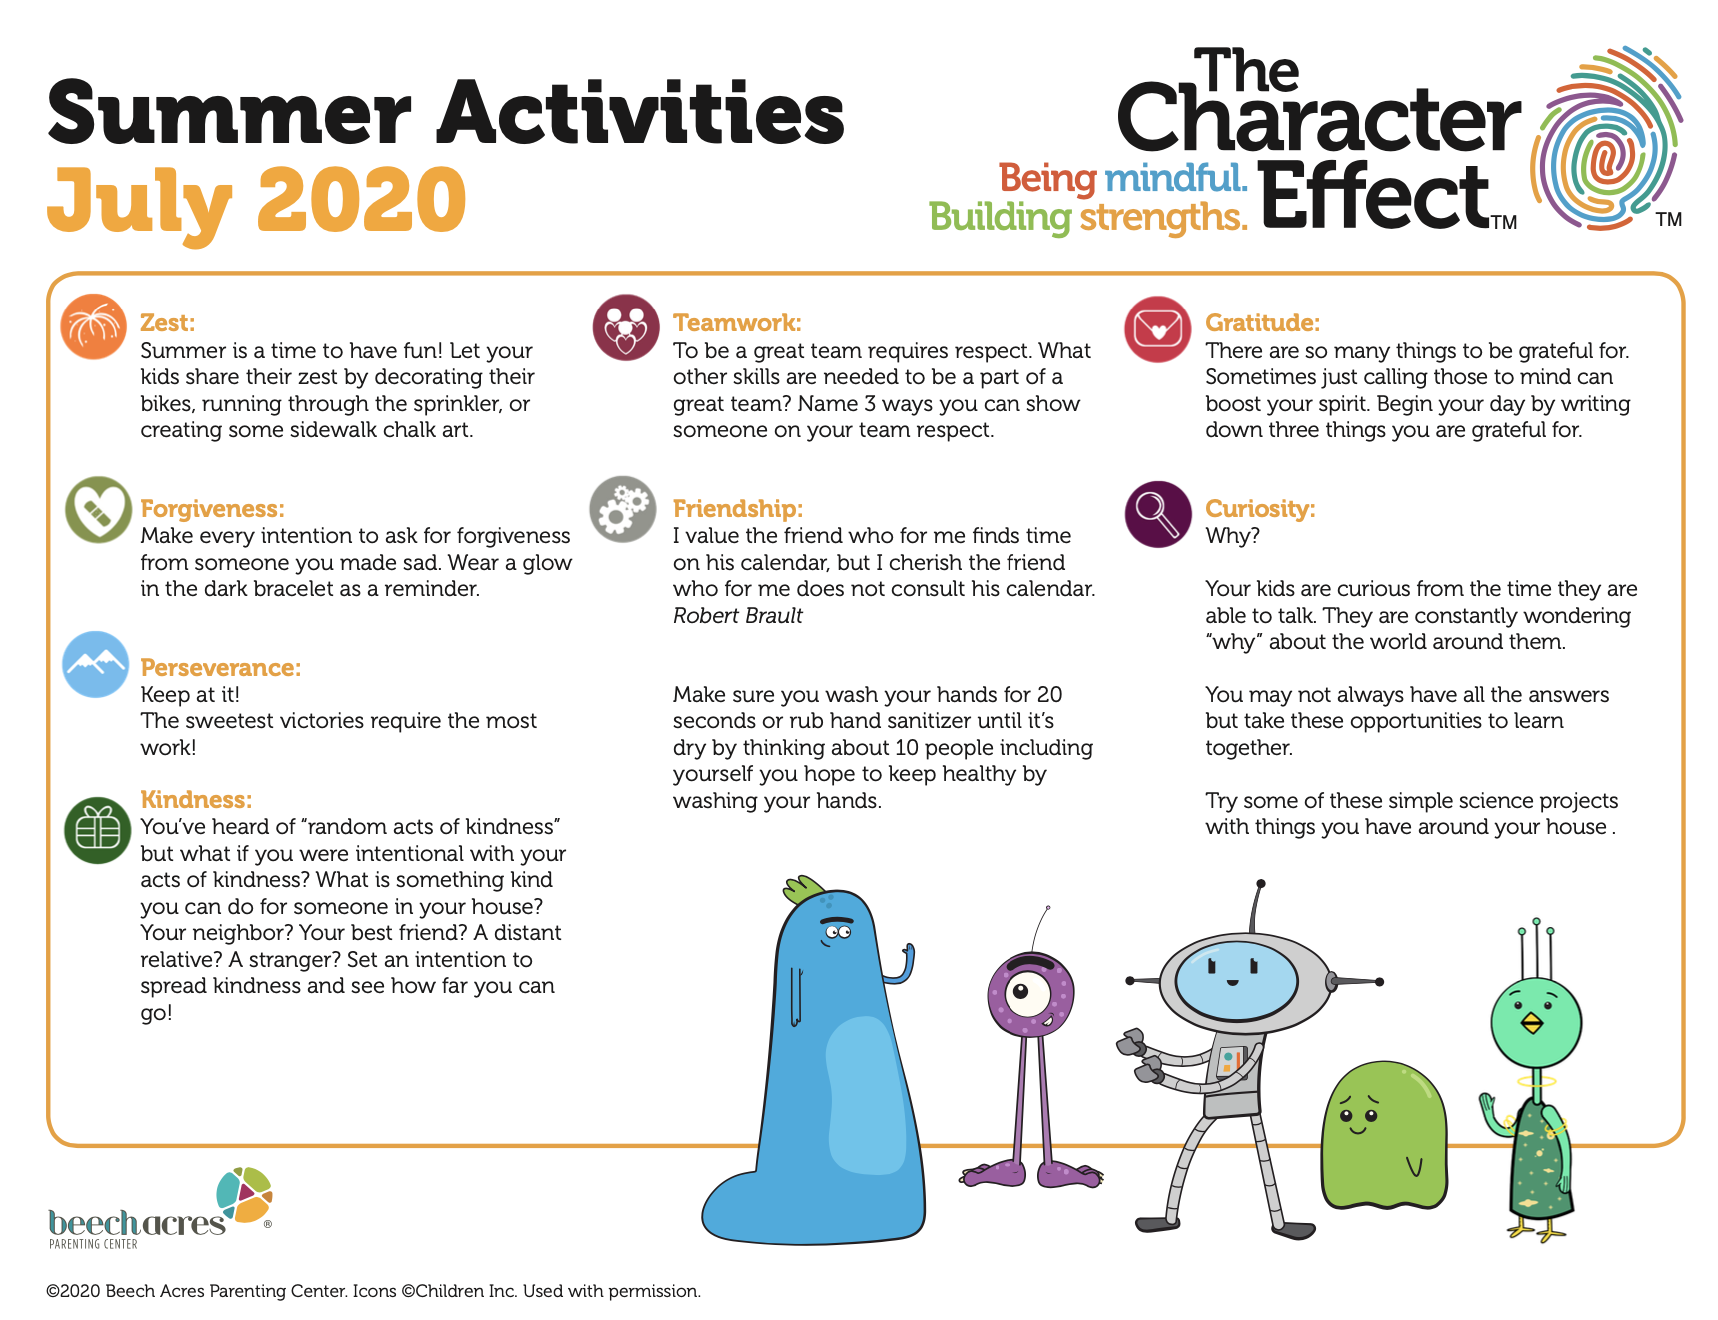 Summer Activities for July From The Character Effect™